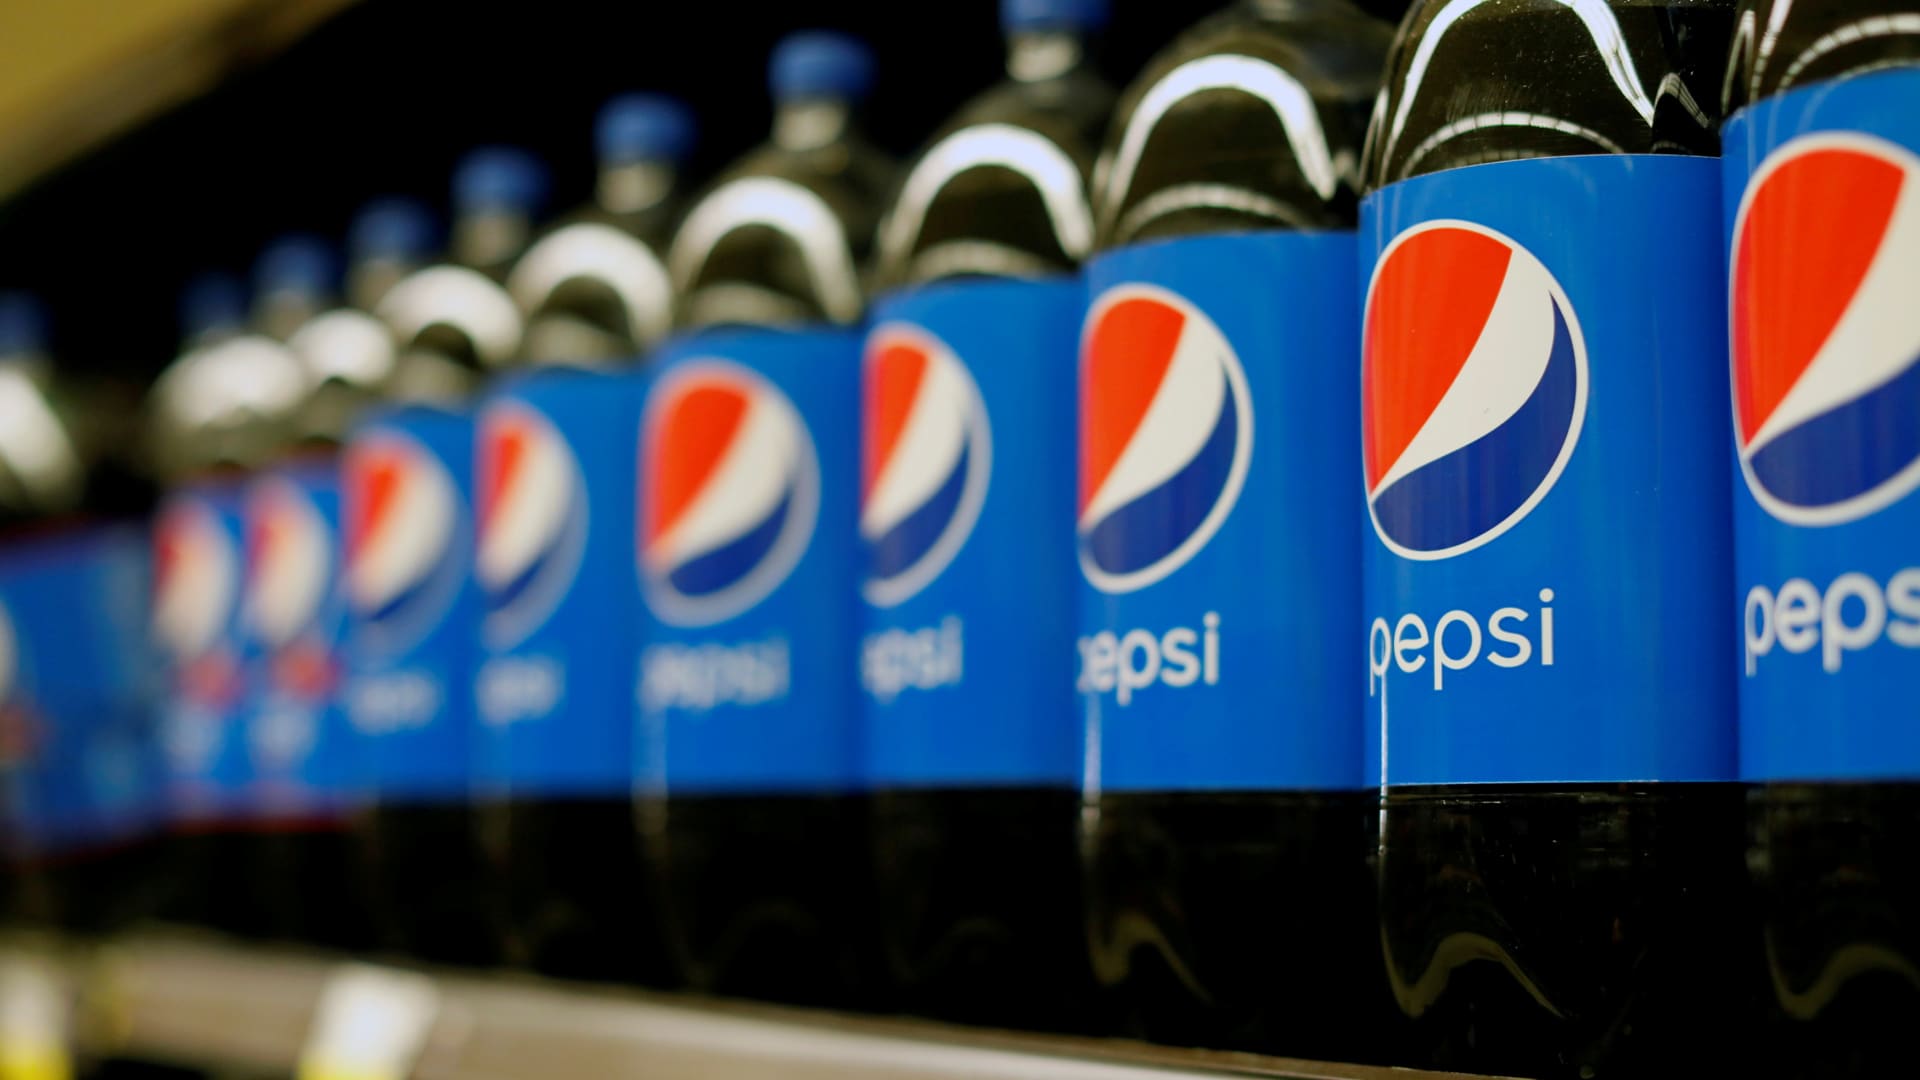 Bottles of Pepsi are pictured at a grocery store in Pasadena, California.